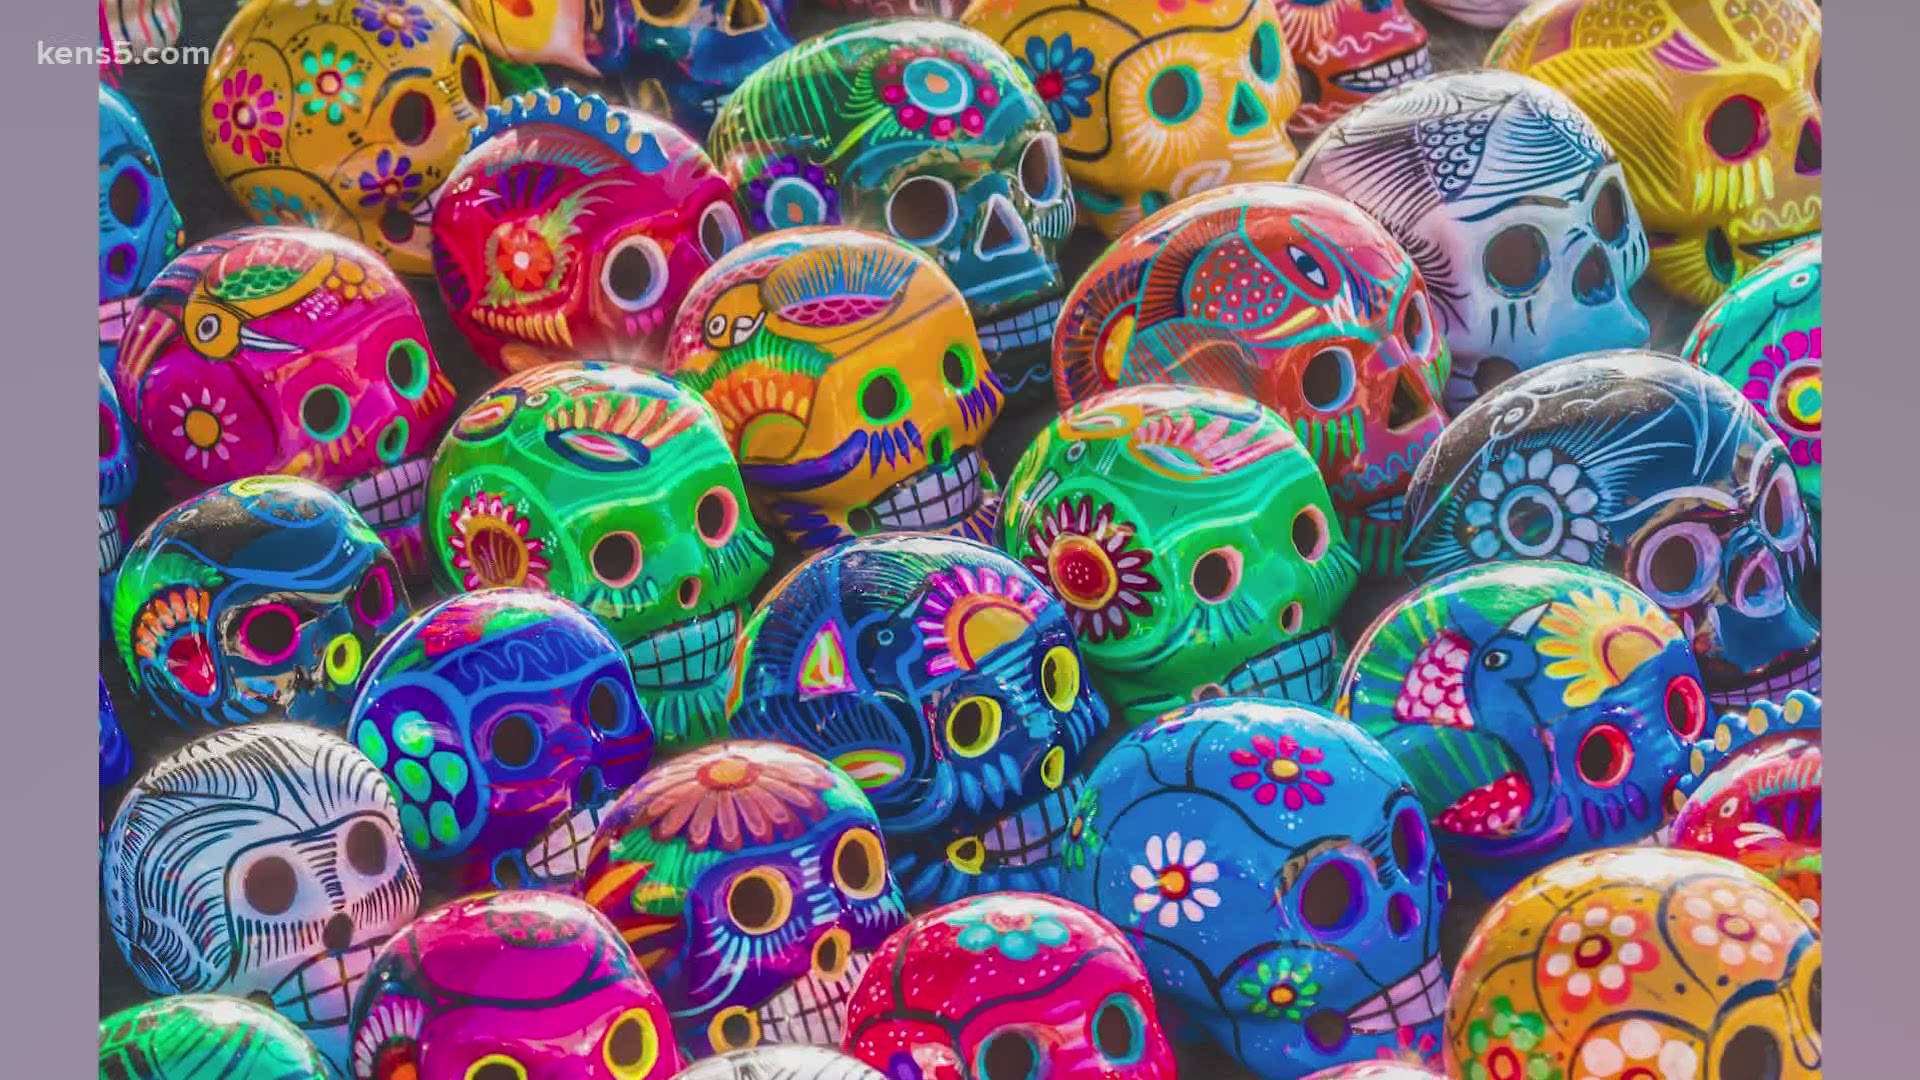 This weekend families will gather to celebrate Halloween, but also to celebrate the Day of the Dead. Digital Journalist Megan Ball shares more on this tradition.